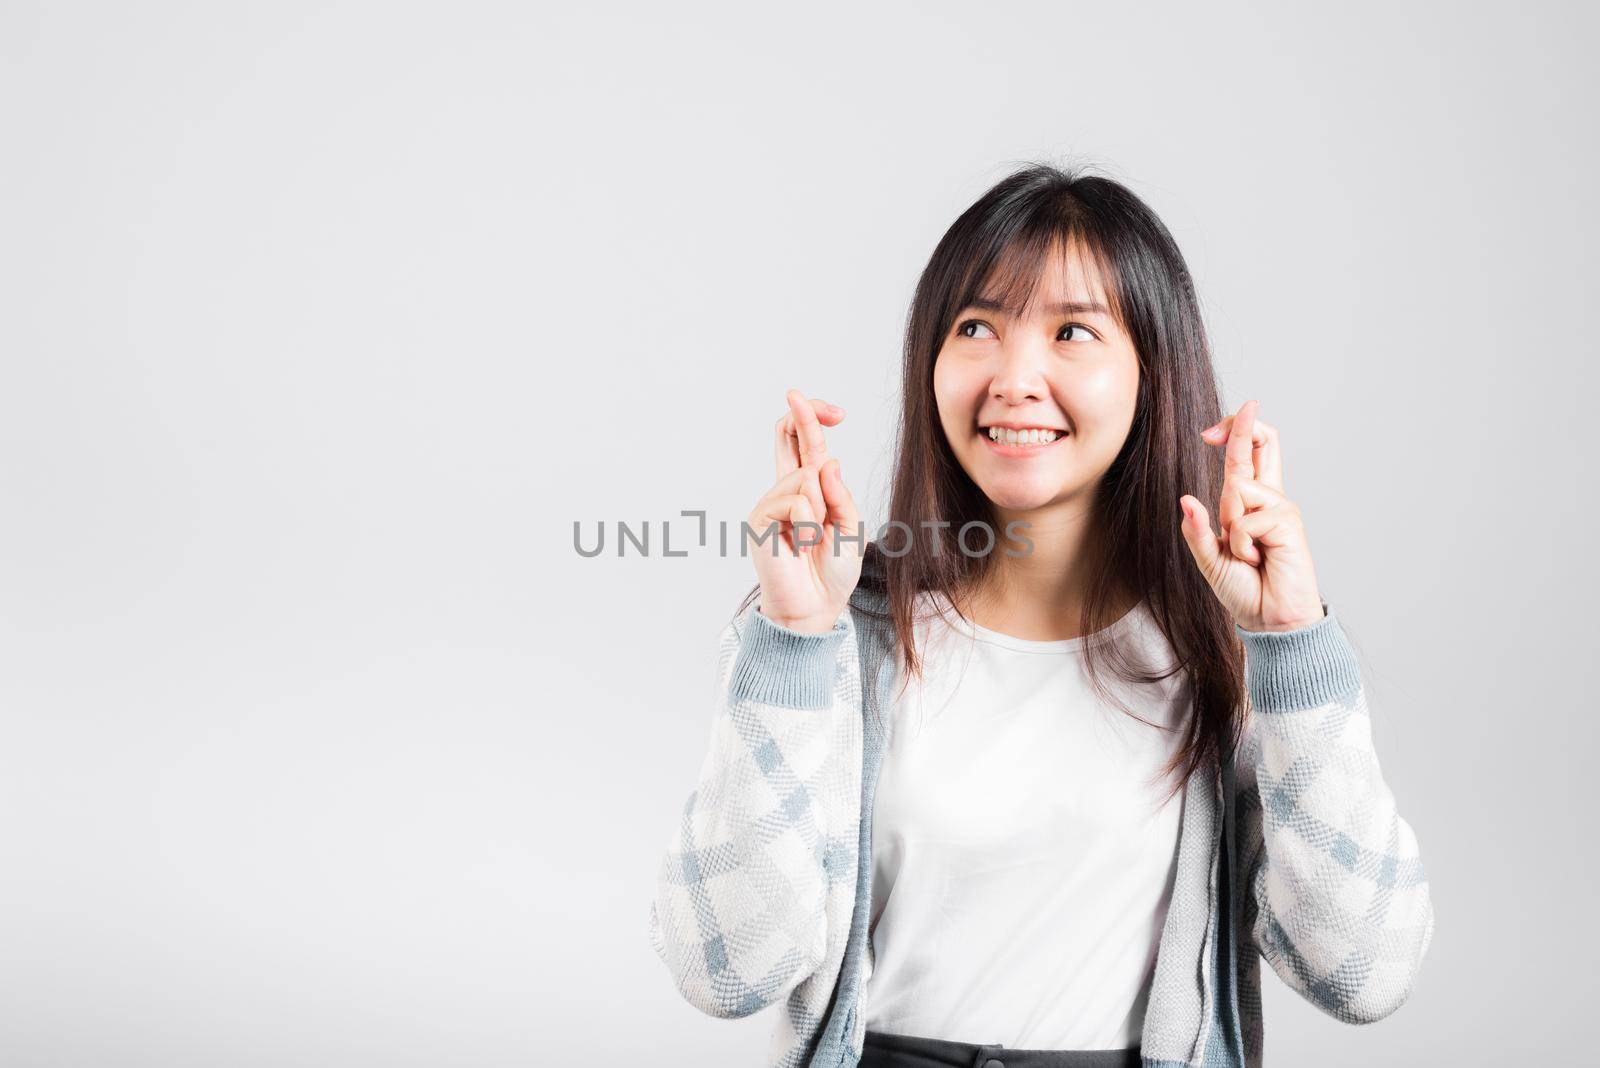 Happy woman have superstition her holding fingers crossed for good luck gesture, Asian beautiful young female smiling superstition, studio shot isolated on white background with copy space